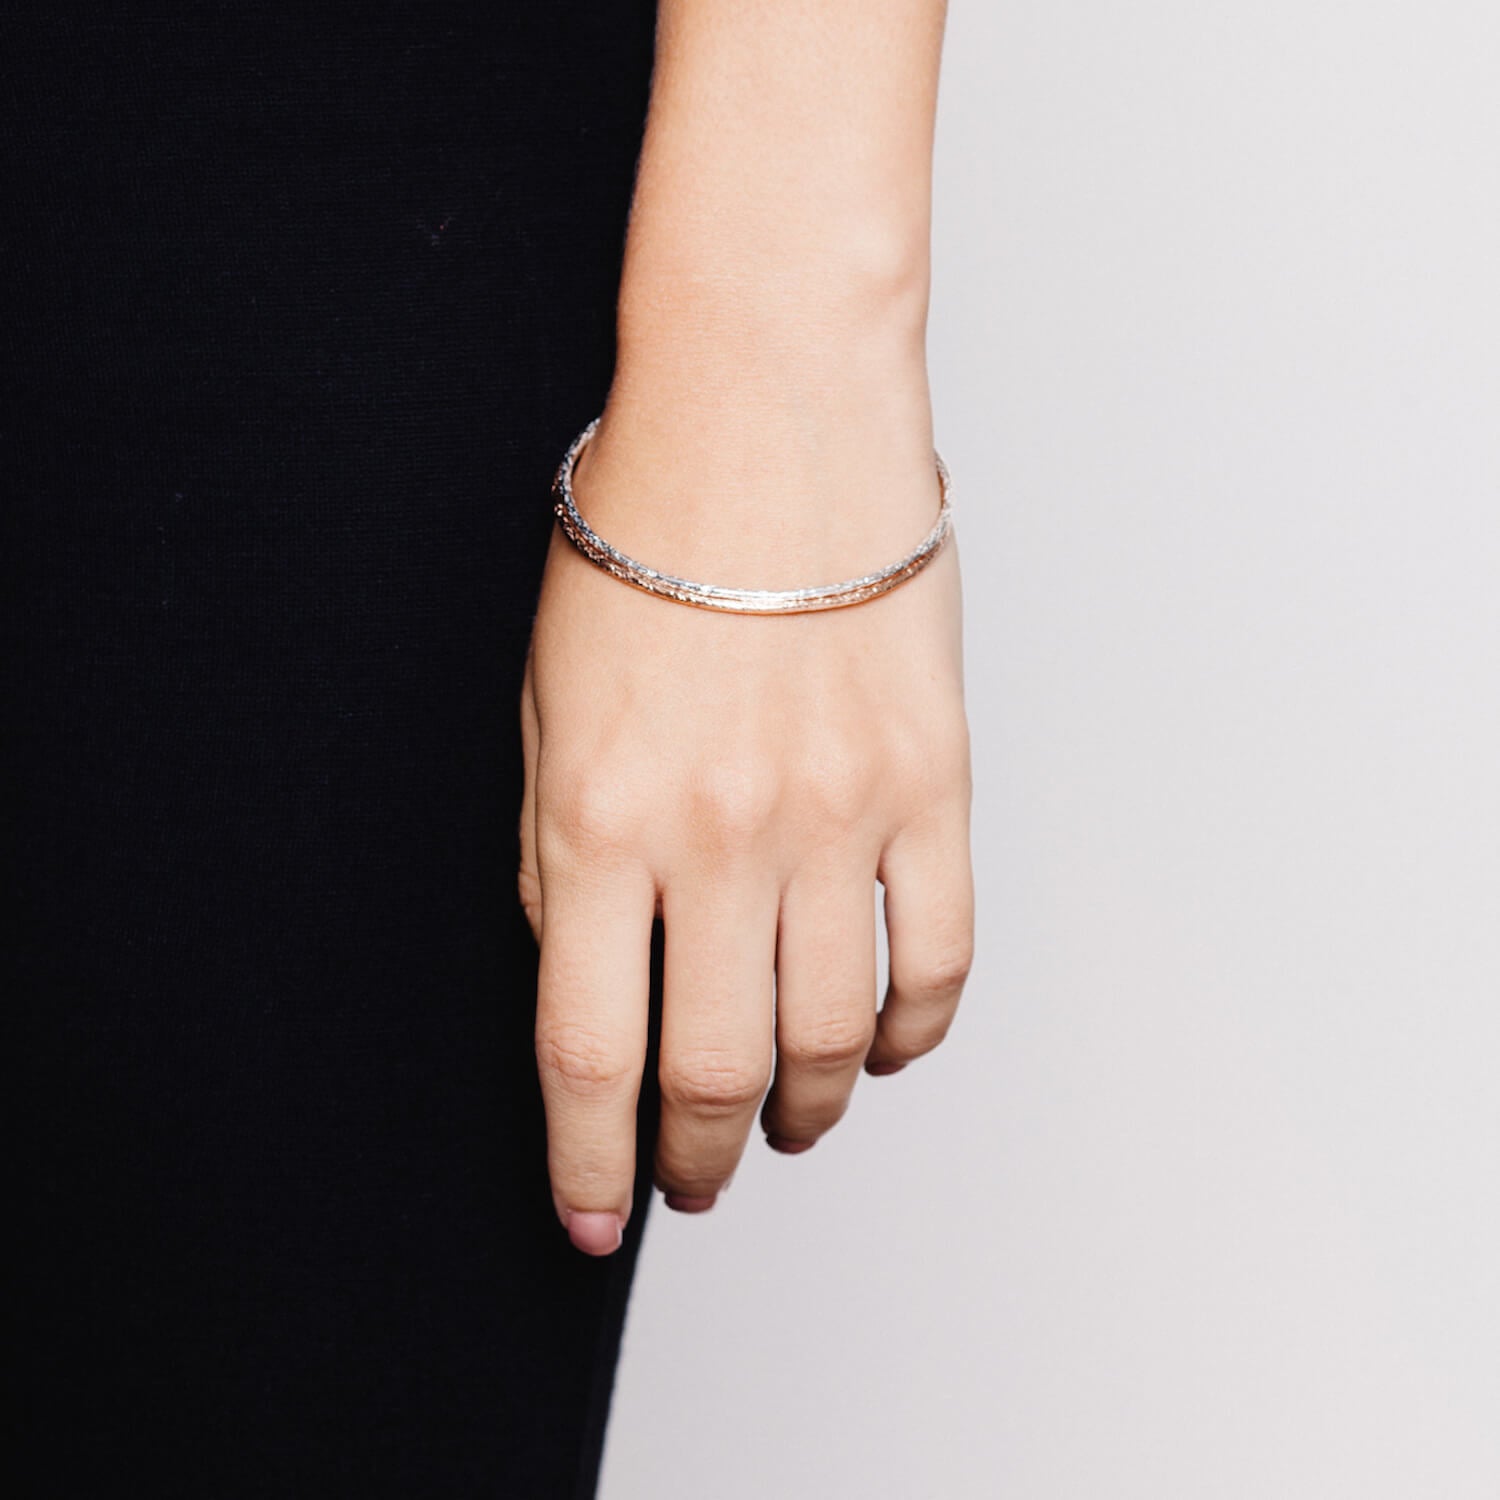 Model wearing two thin bangles with rough meteorite style texturing, one in silver and one in rose gold